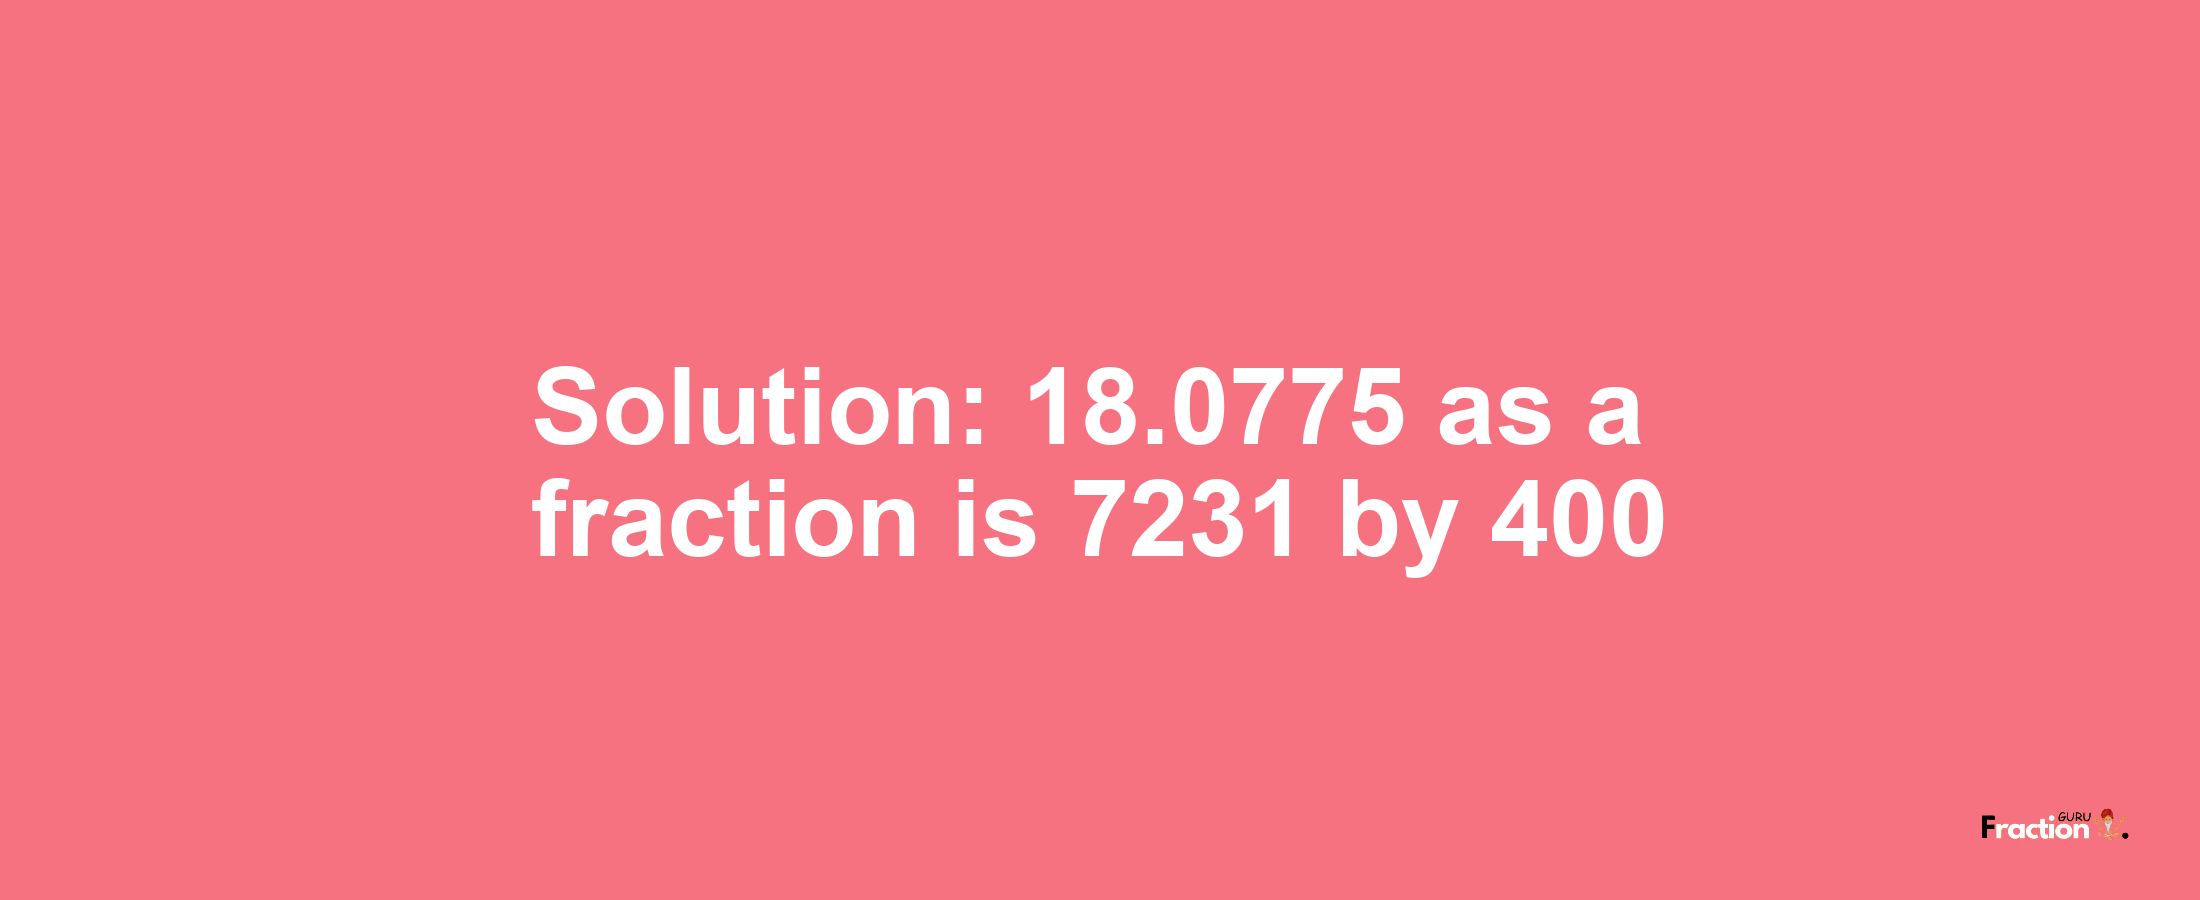 Solution:18.0775 as a fraction is 7231/400